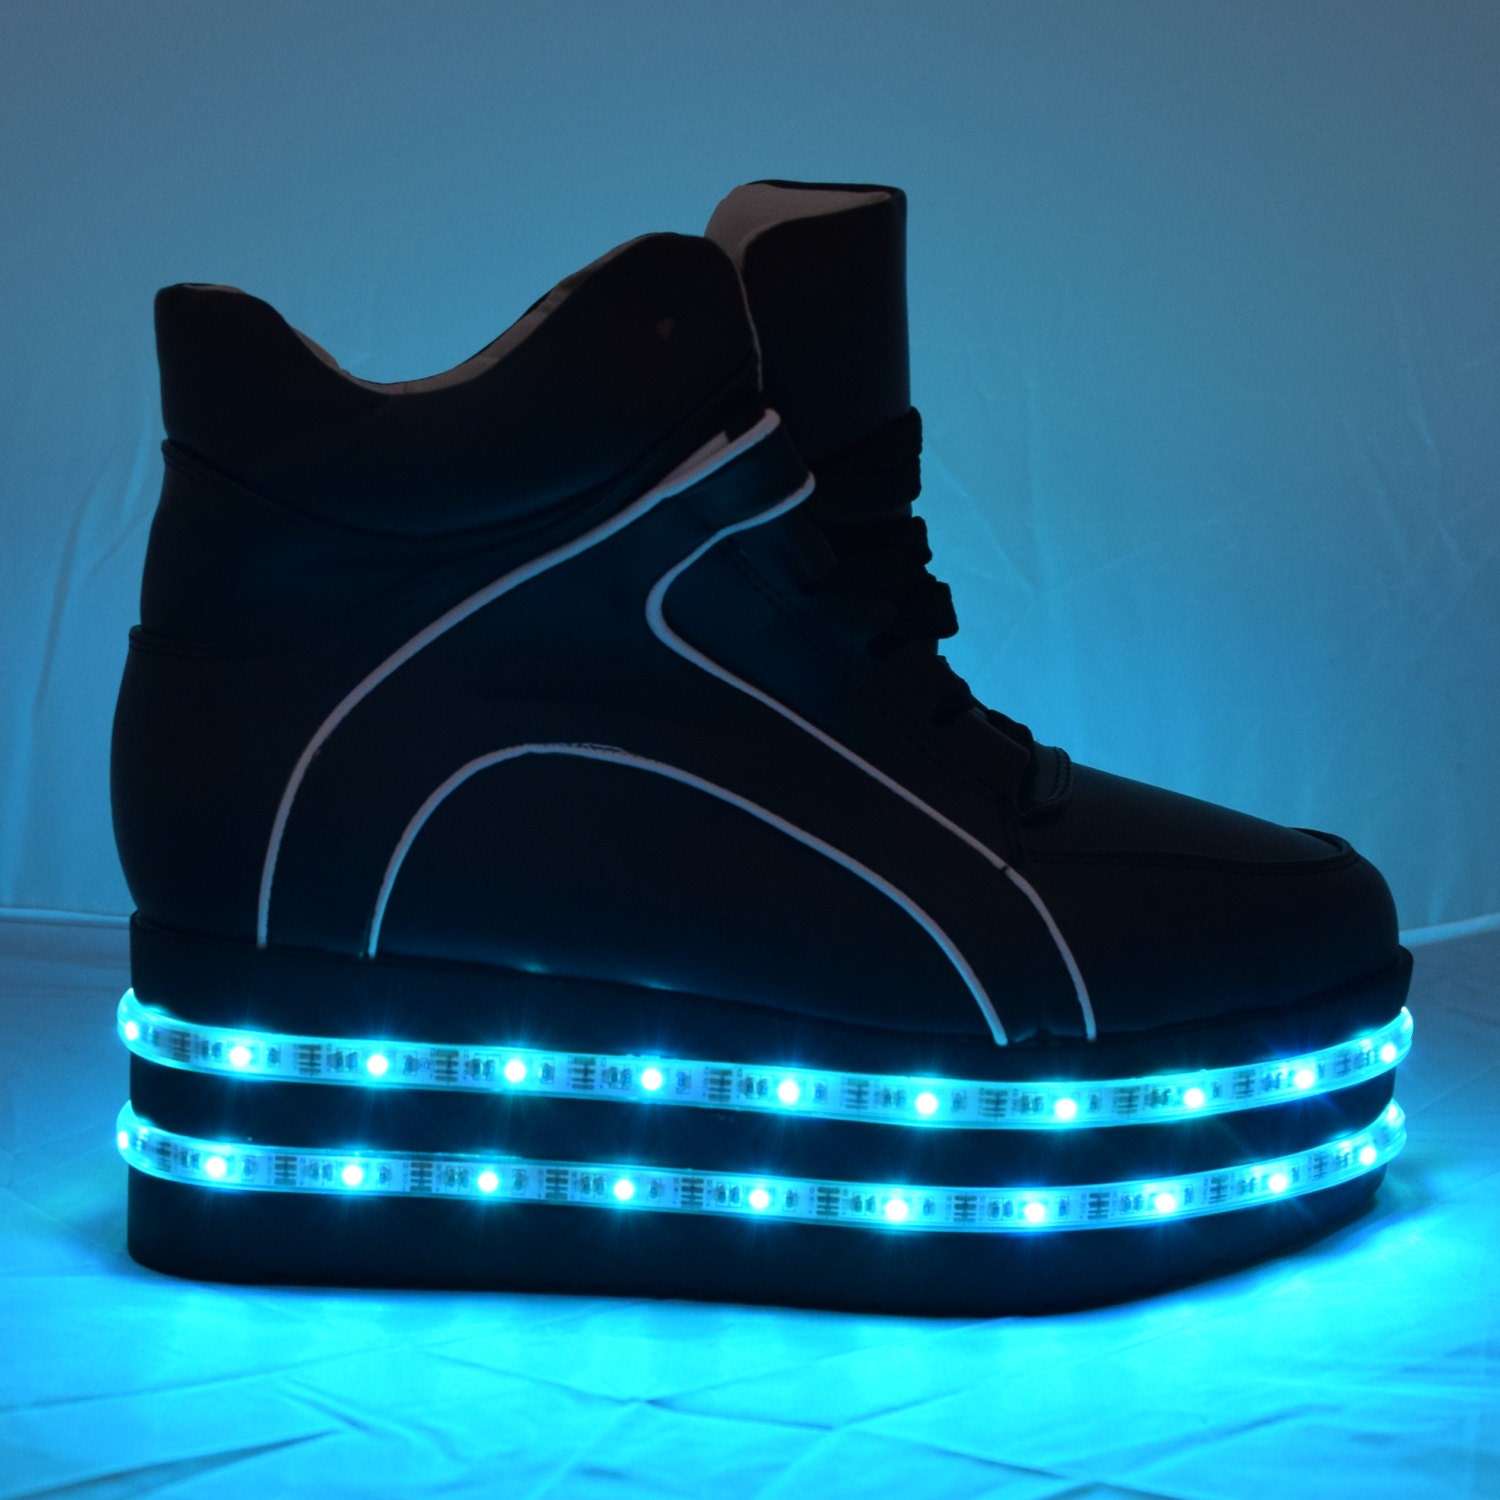 Light up LED hightop PLATFORM shoes with tons of by NeonNancy